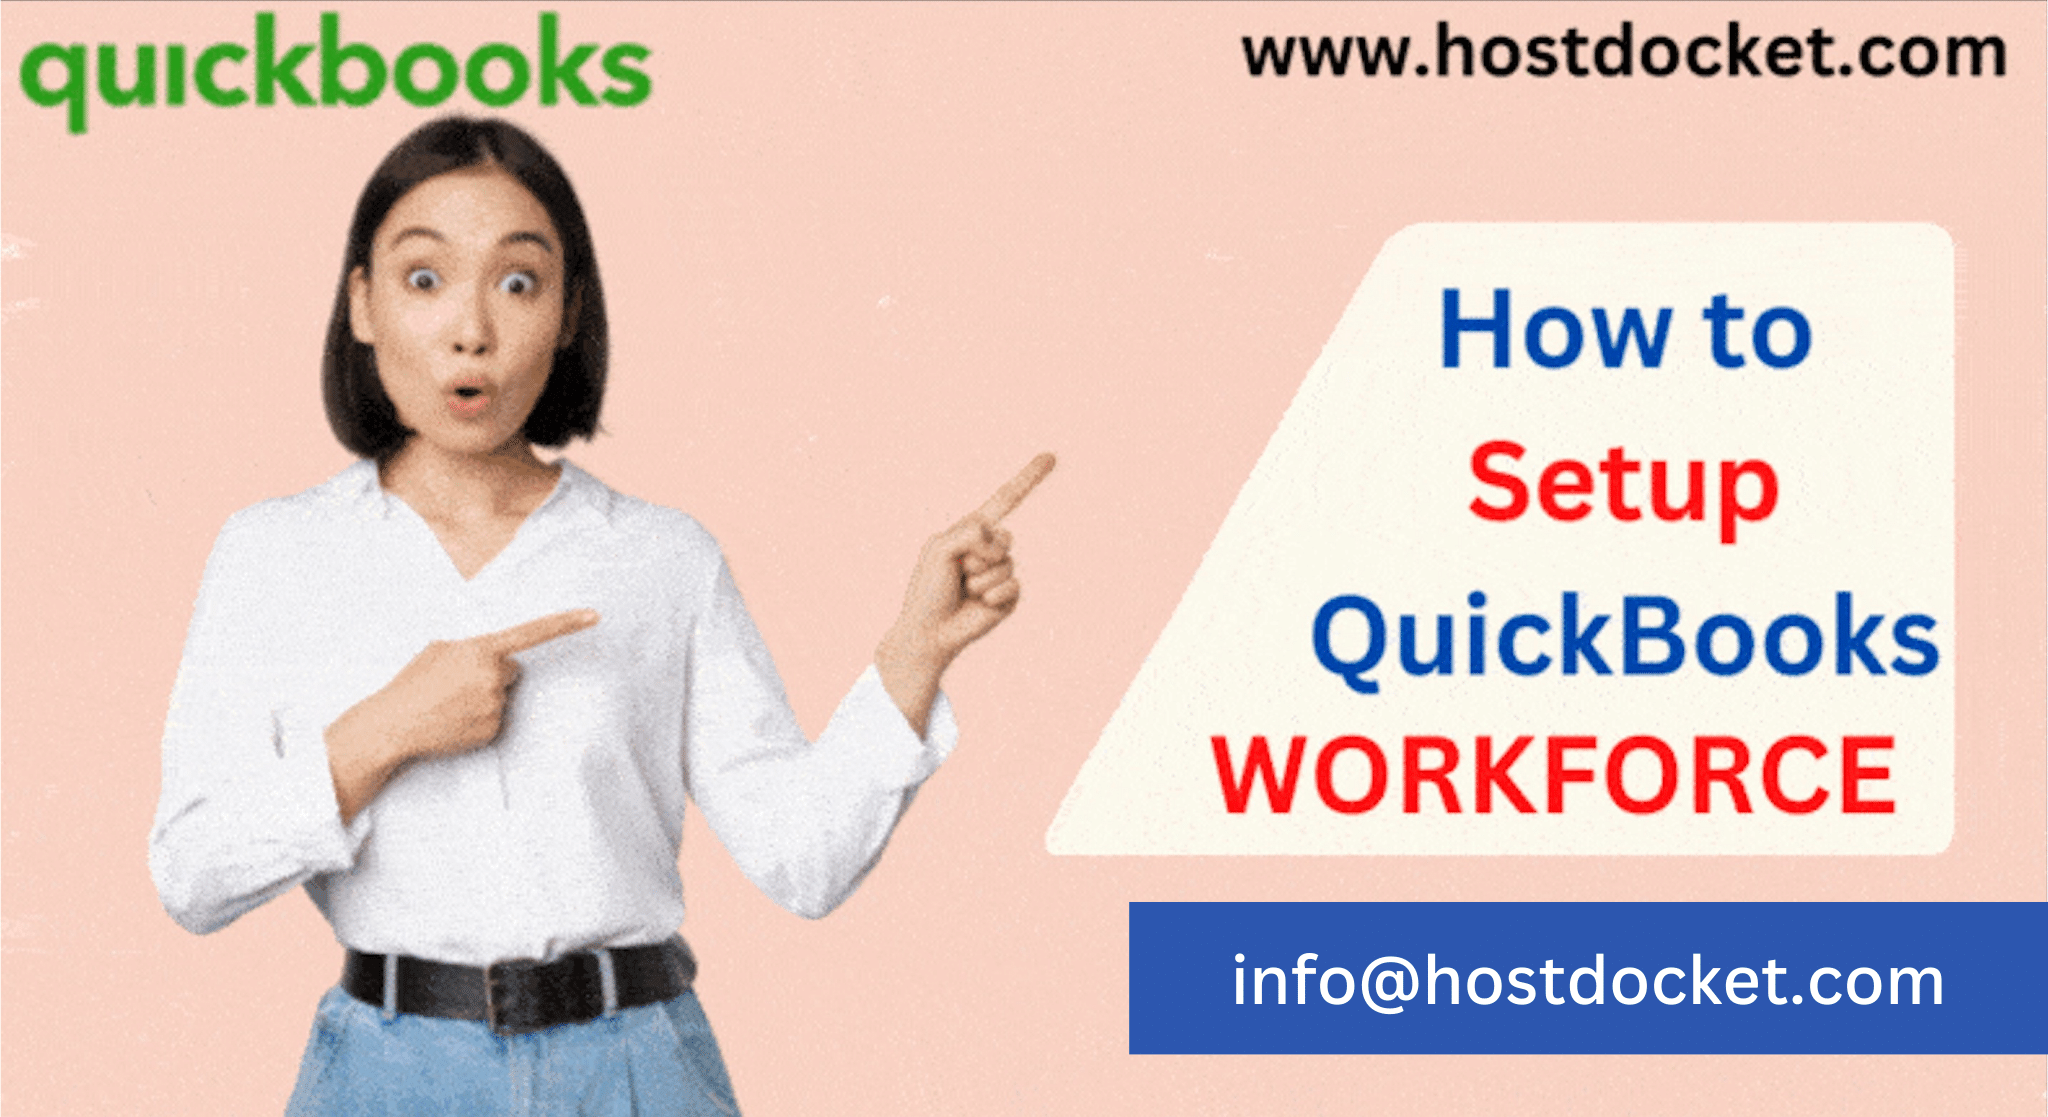 How to Setup QuickBooks Workforce - feature image